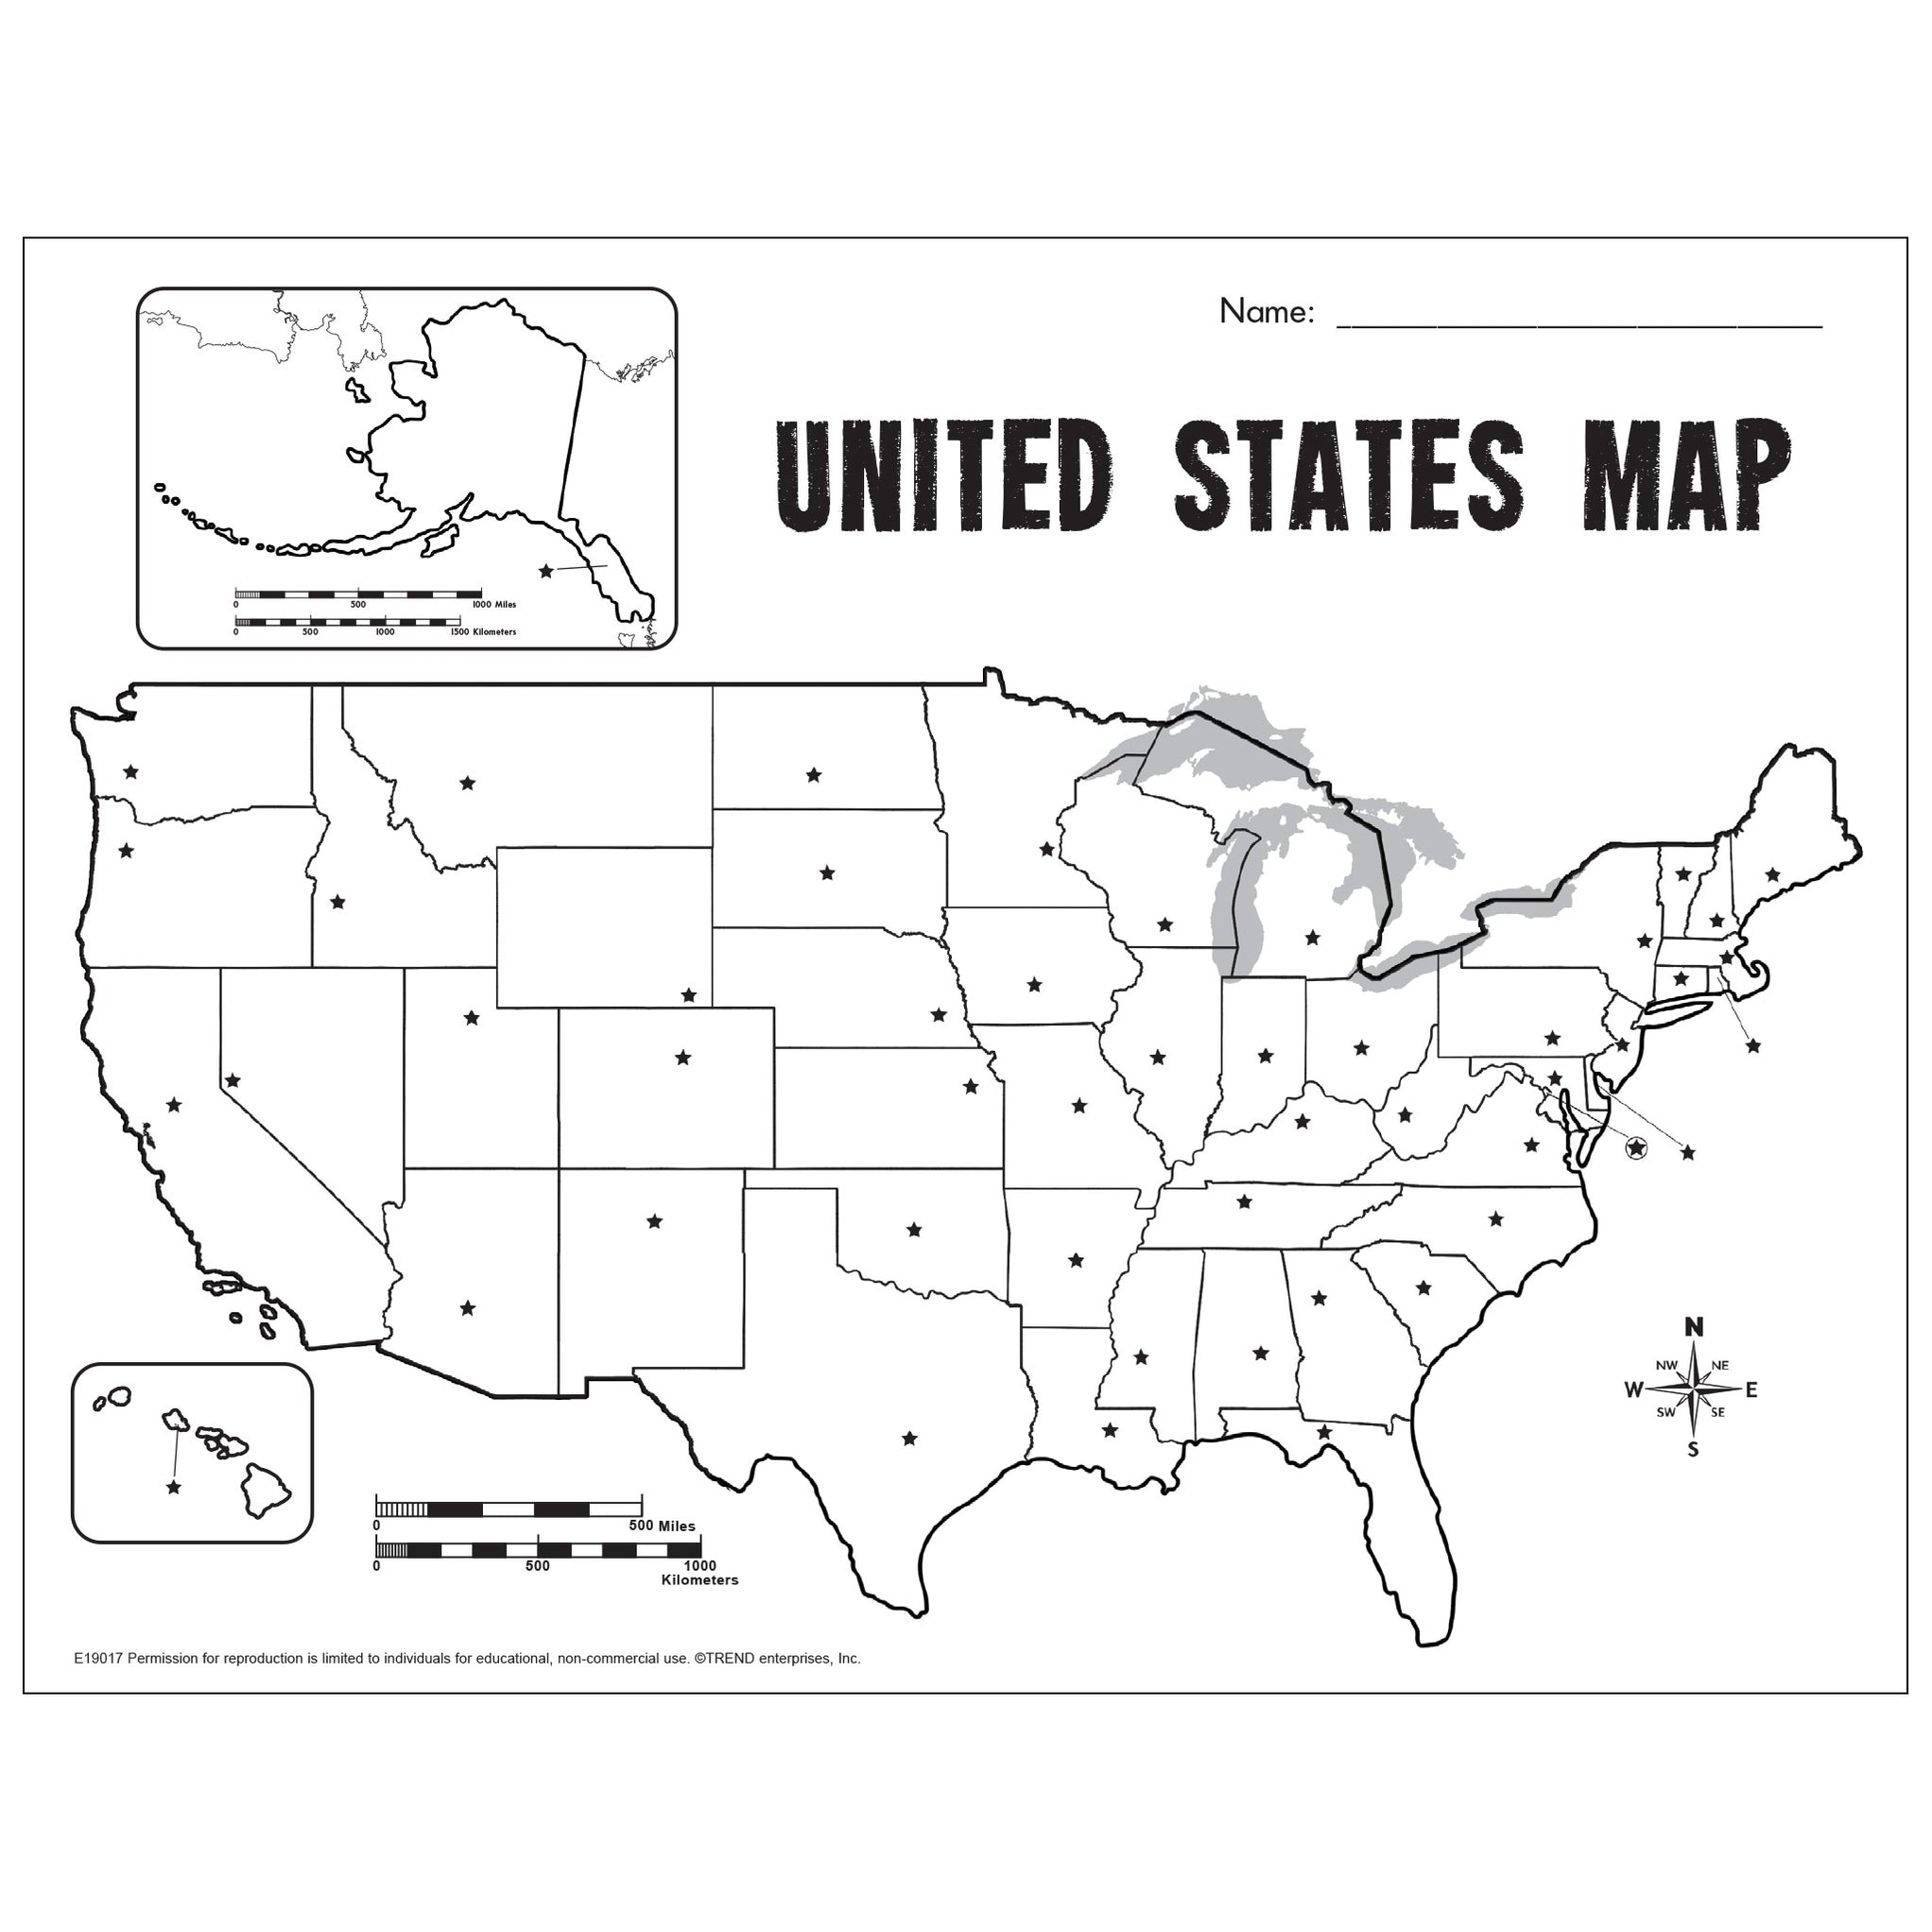 United States Map Blank Project Sheet Free Printable Trend — Trend Enterprises Inc 1620